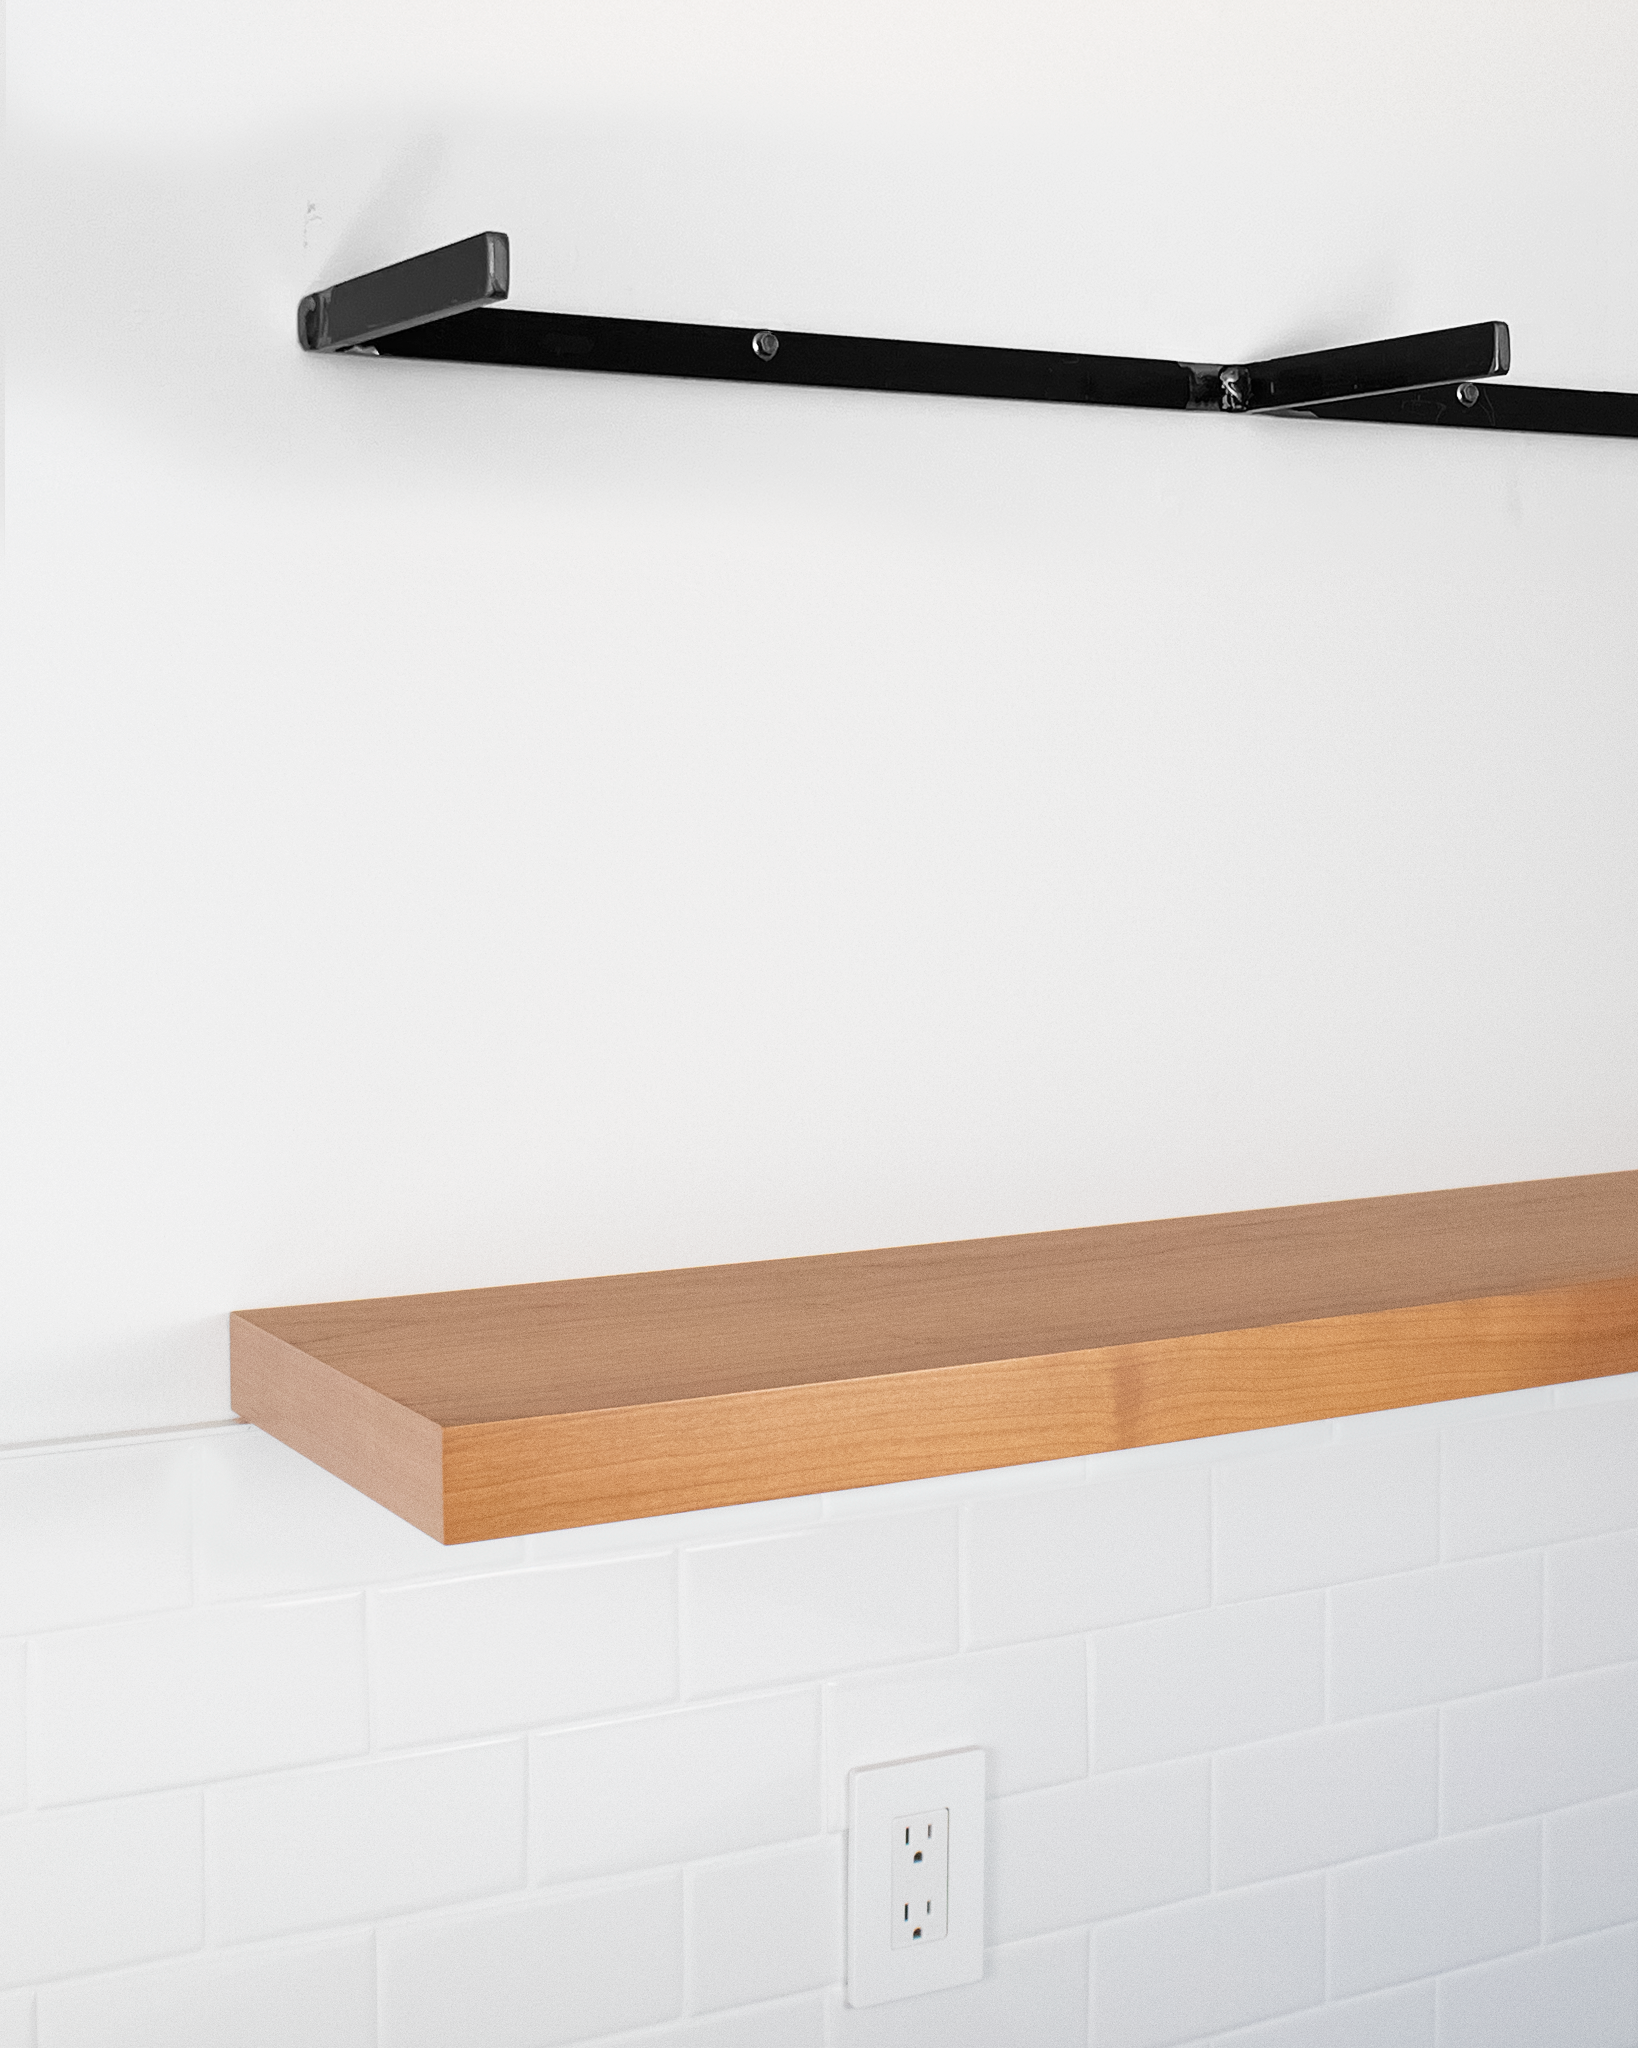 Cherry Floating Shelves 1.75" thick